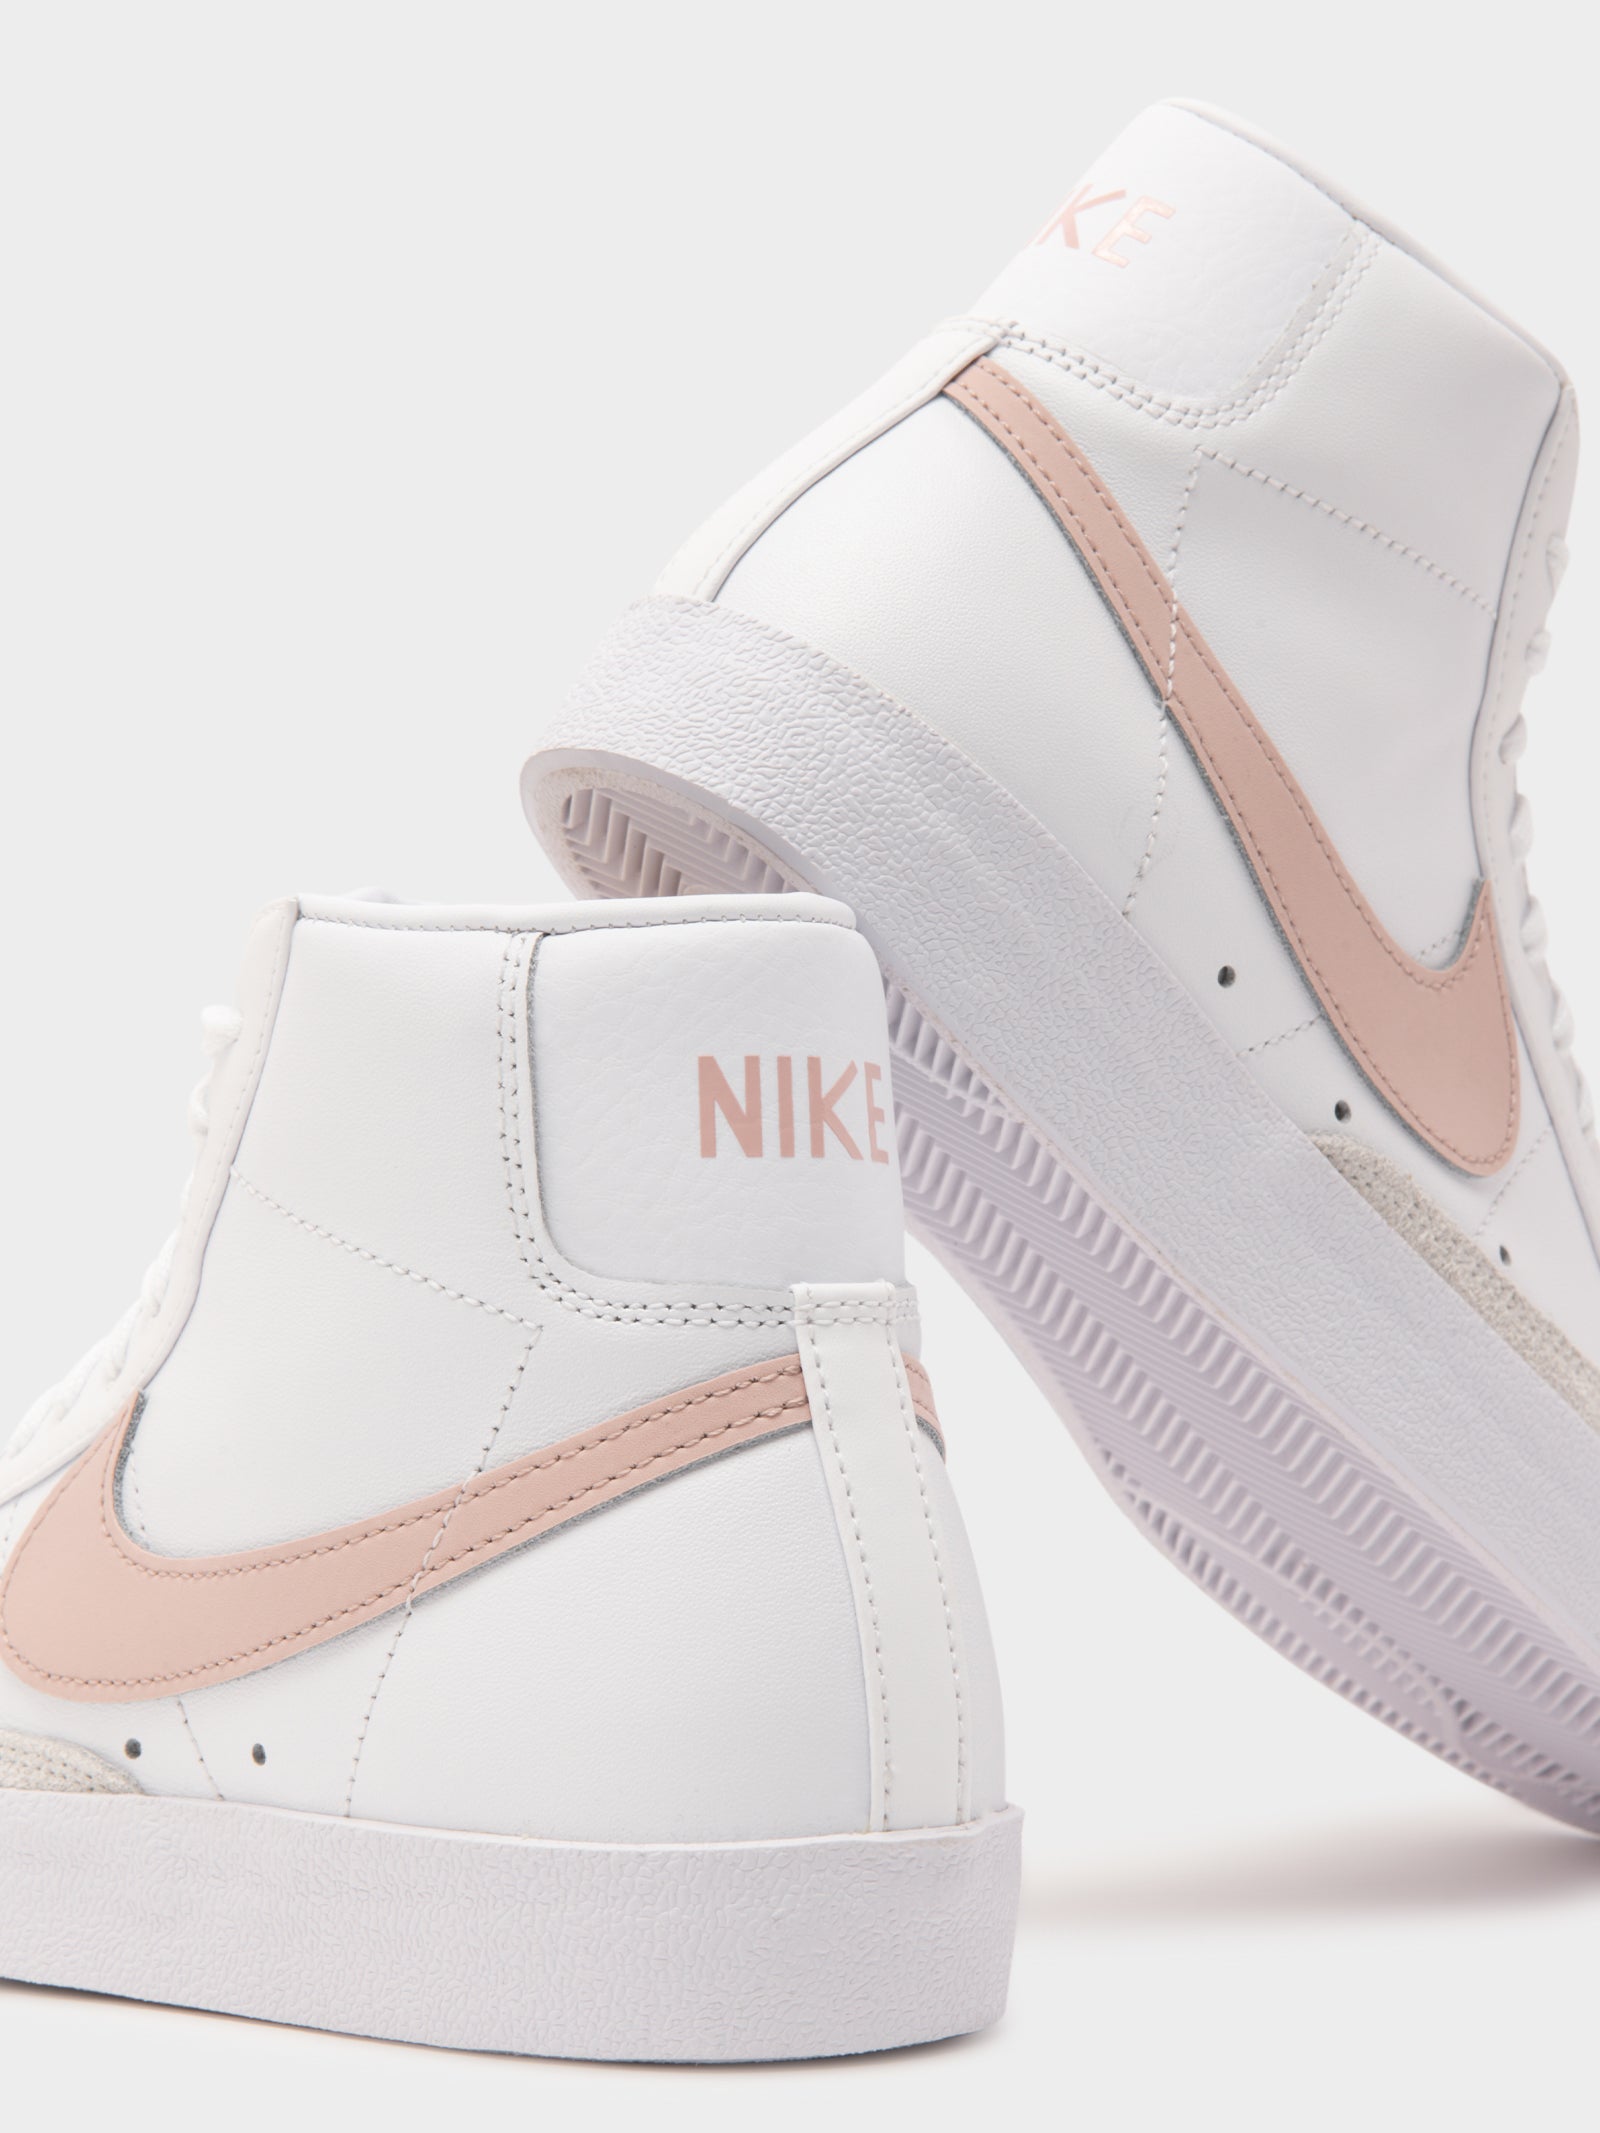 Womens Blazer Mid 77' High Top Sneaker in White & Pink Oxford